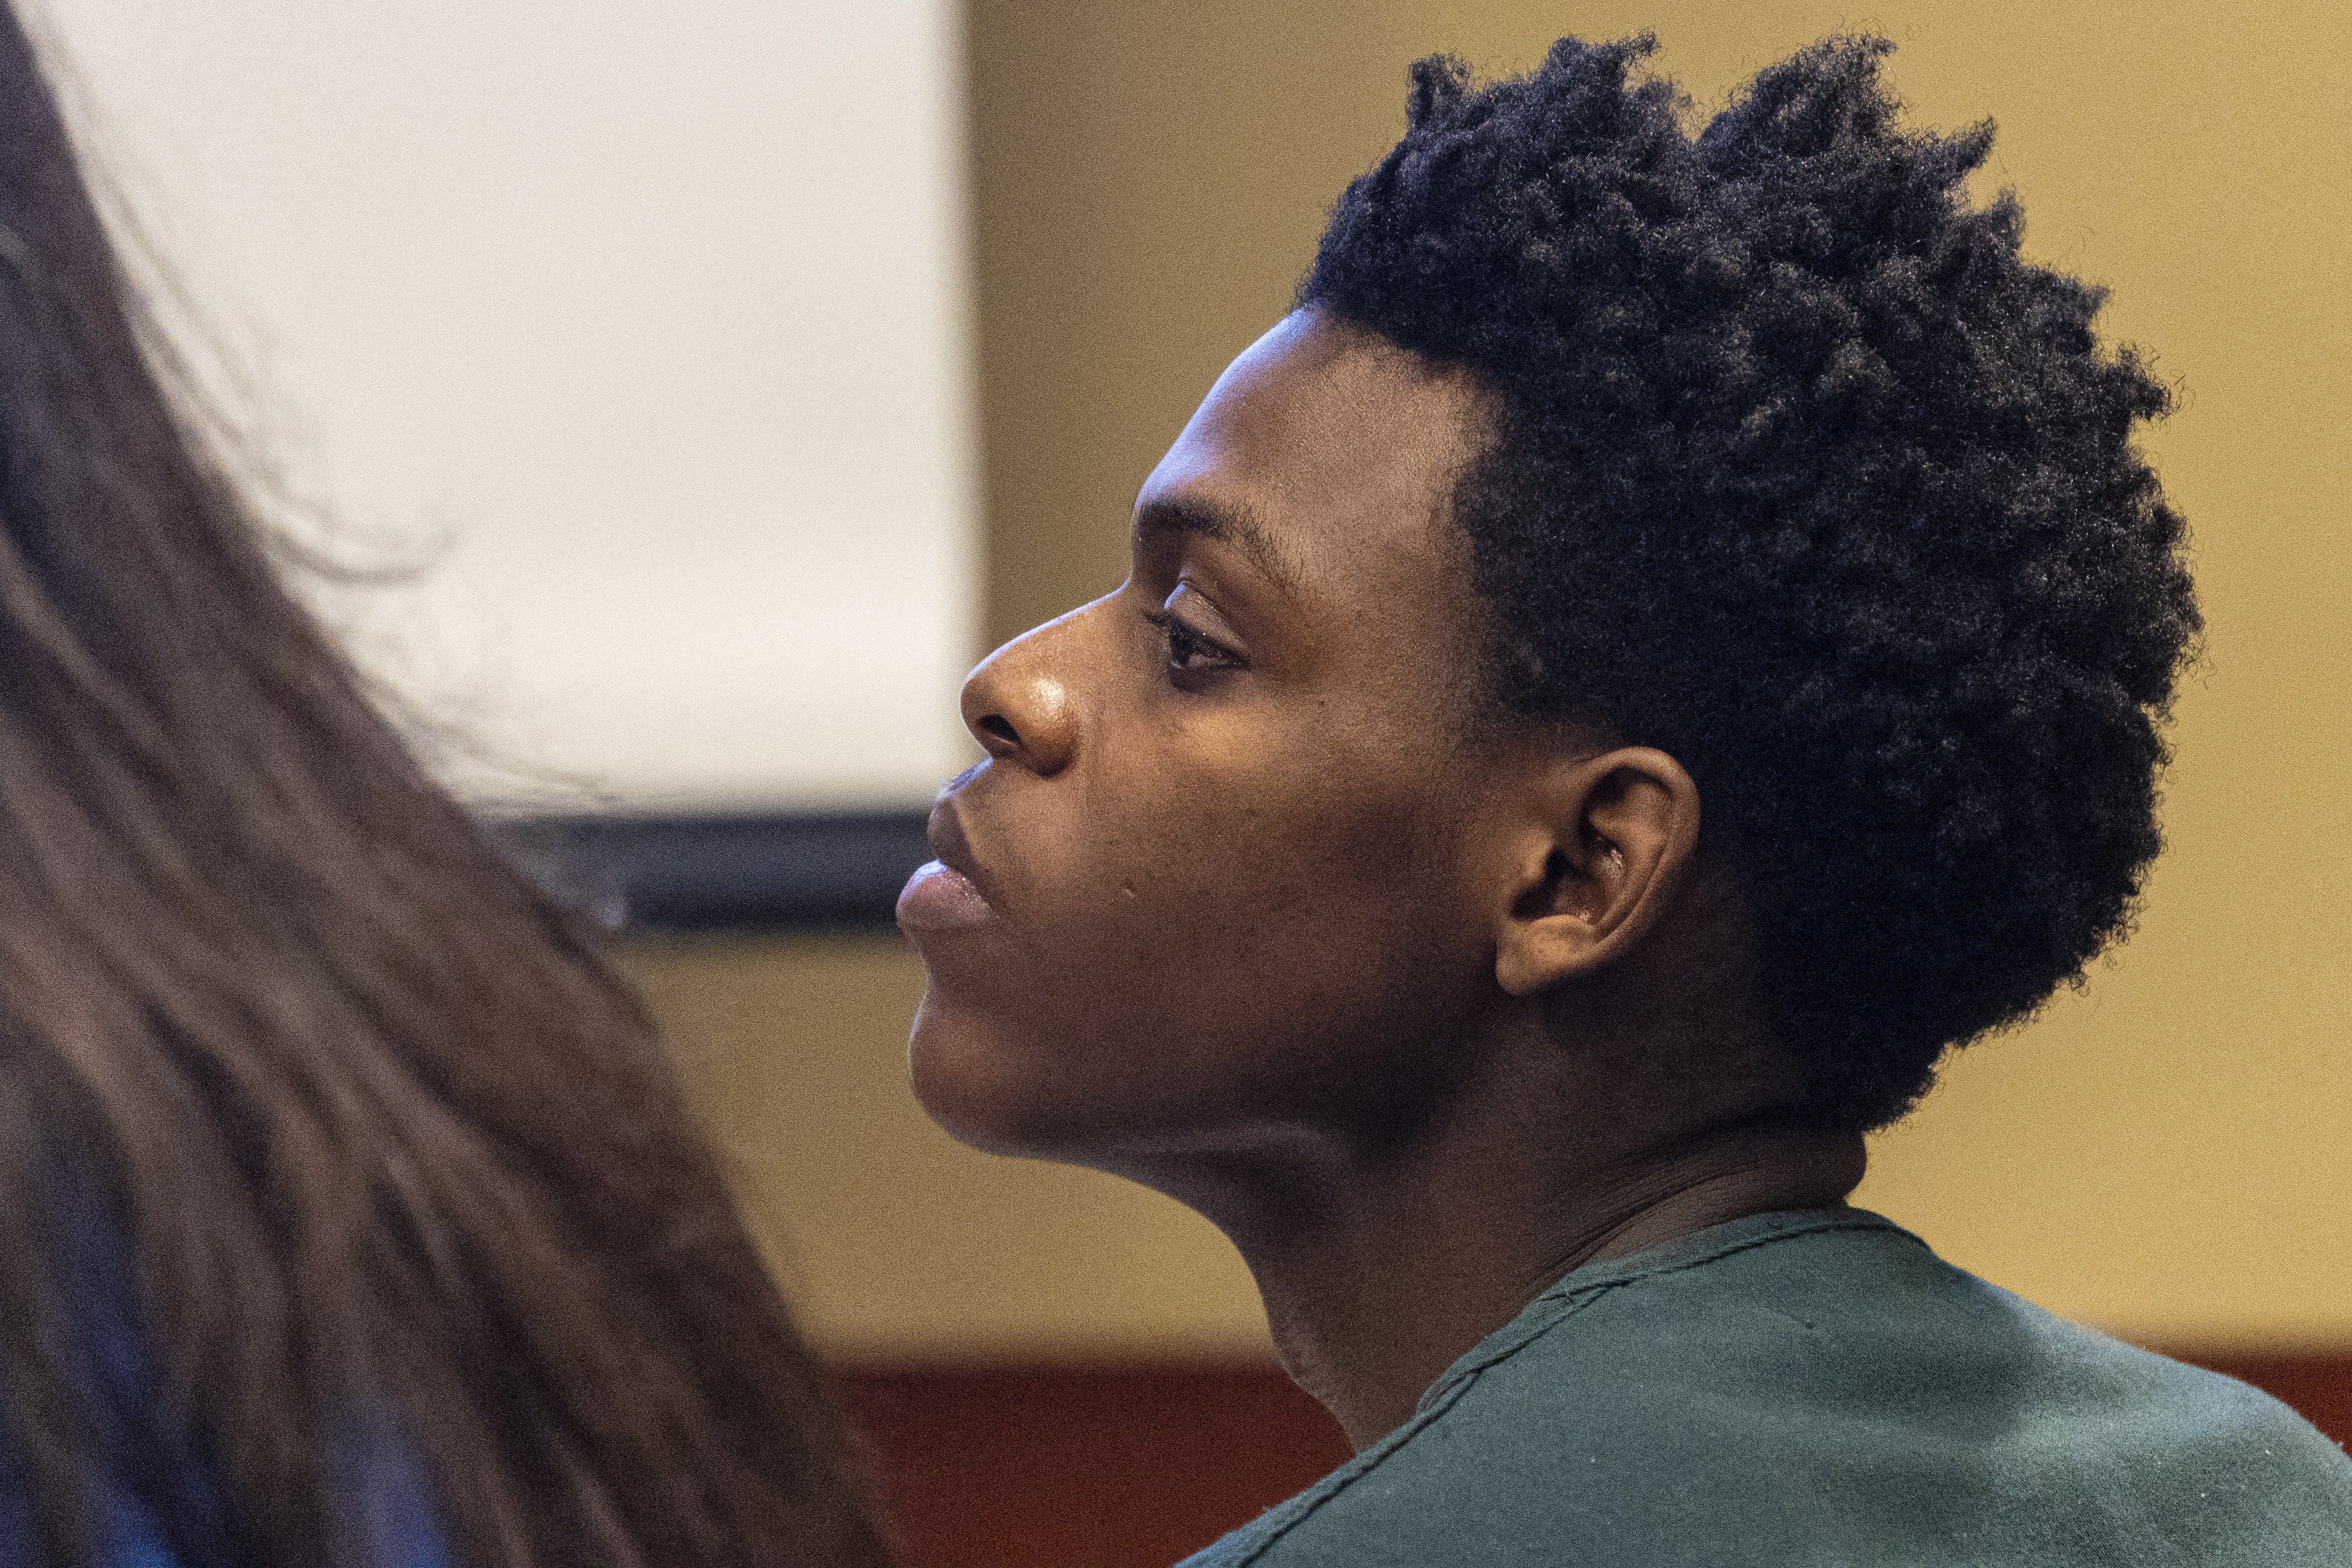 Jaheim Hayes-Goree, 20, appears for preliminary examination at the 63rd District Courthouse in Grand Rapids, Michigan on Thursday, June 30, 2022. The trio of defendants appeared in court, (not pictured Javonte Rosa, 23 and Rishy Manning, 22) are charged with felony murder in the shooting death of Joseph Wilder, 50, who was shot and killed during a robbery attempt at a Huntington Bank ATM on South Division Avenue in May of 2022. (Joel Bissell | MLive.com)